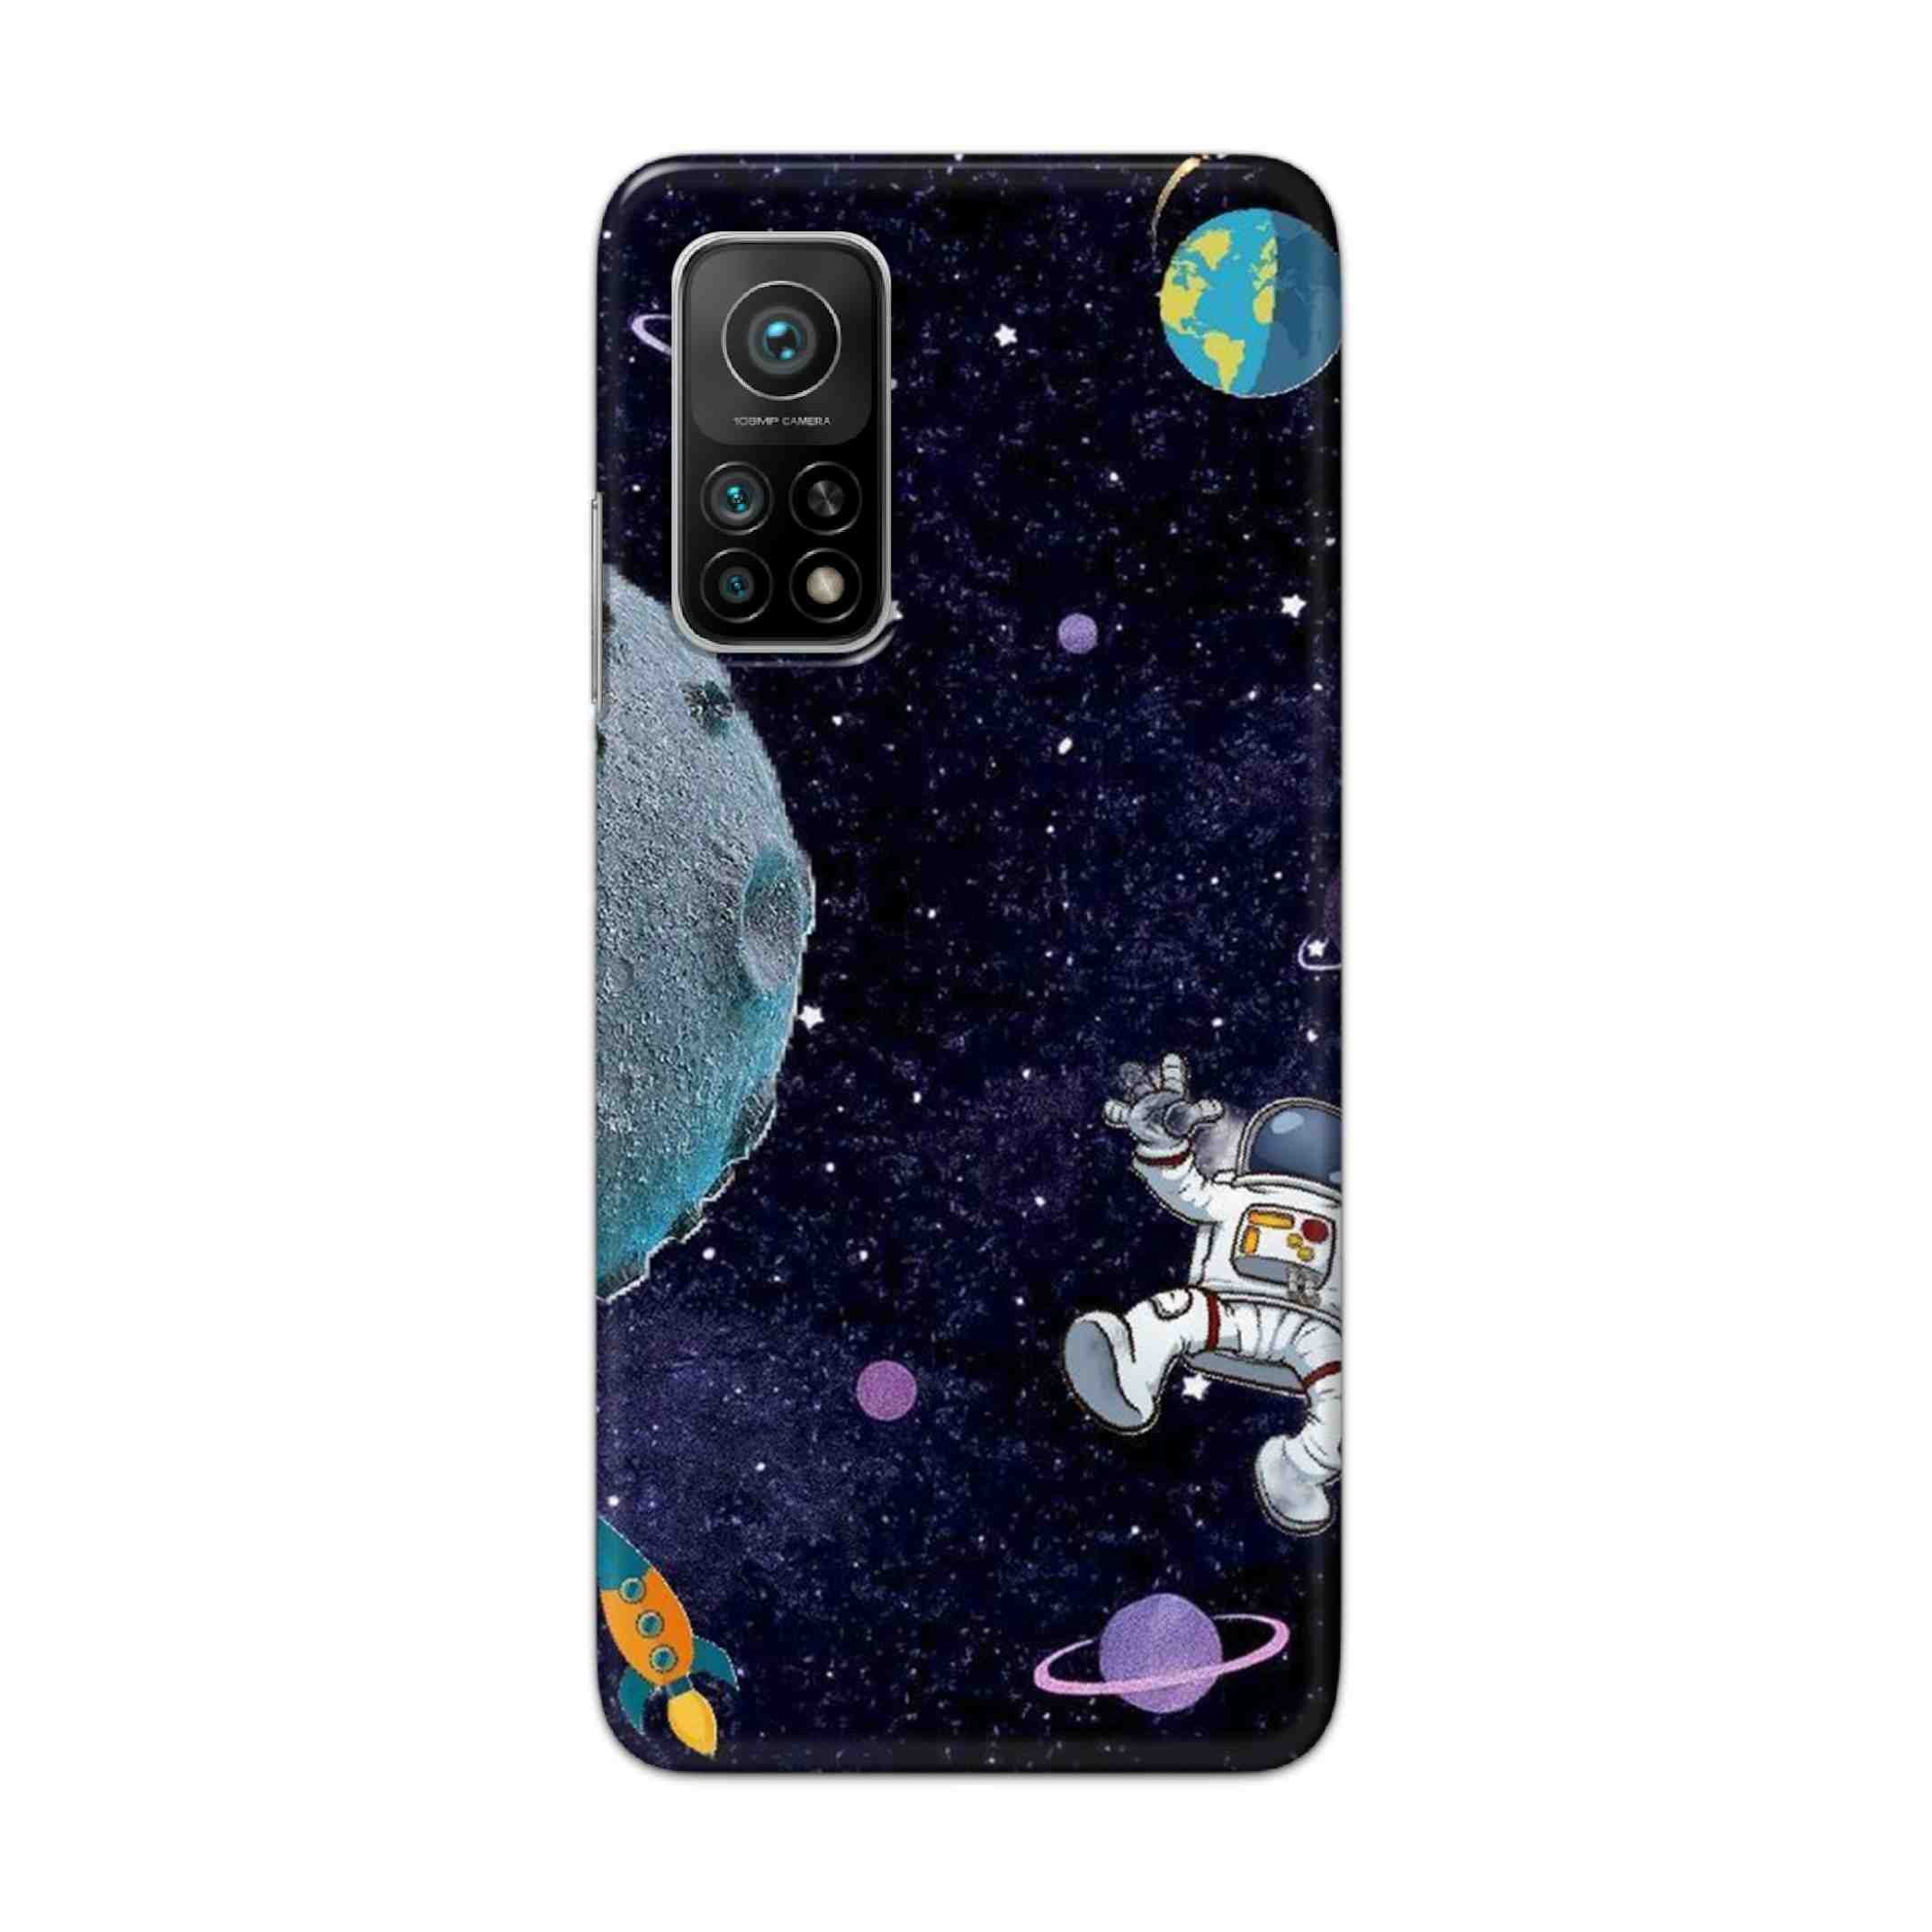 Buy Space Hard Back Mobile Phone Case Cover For Xiaomi Mi 10T 5G Online